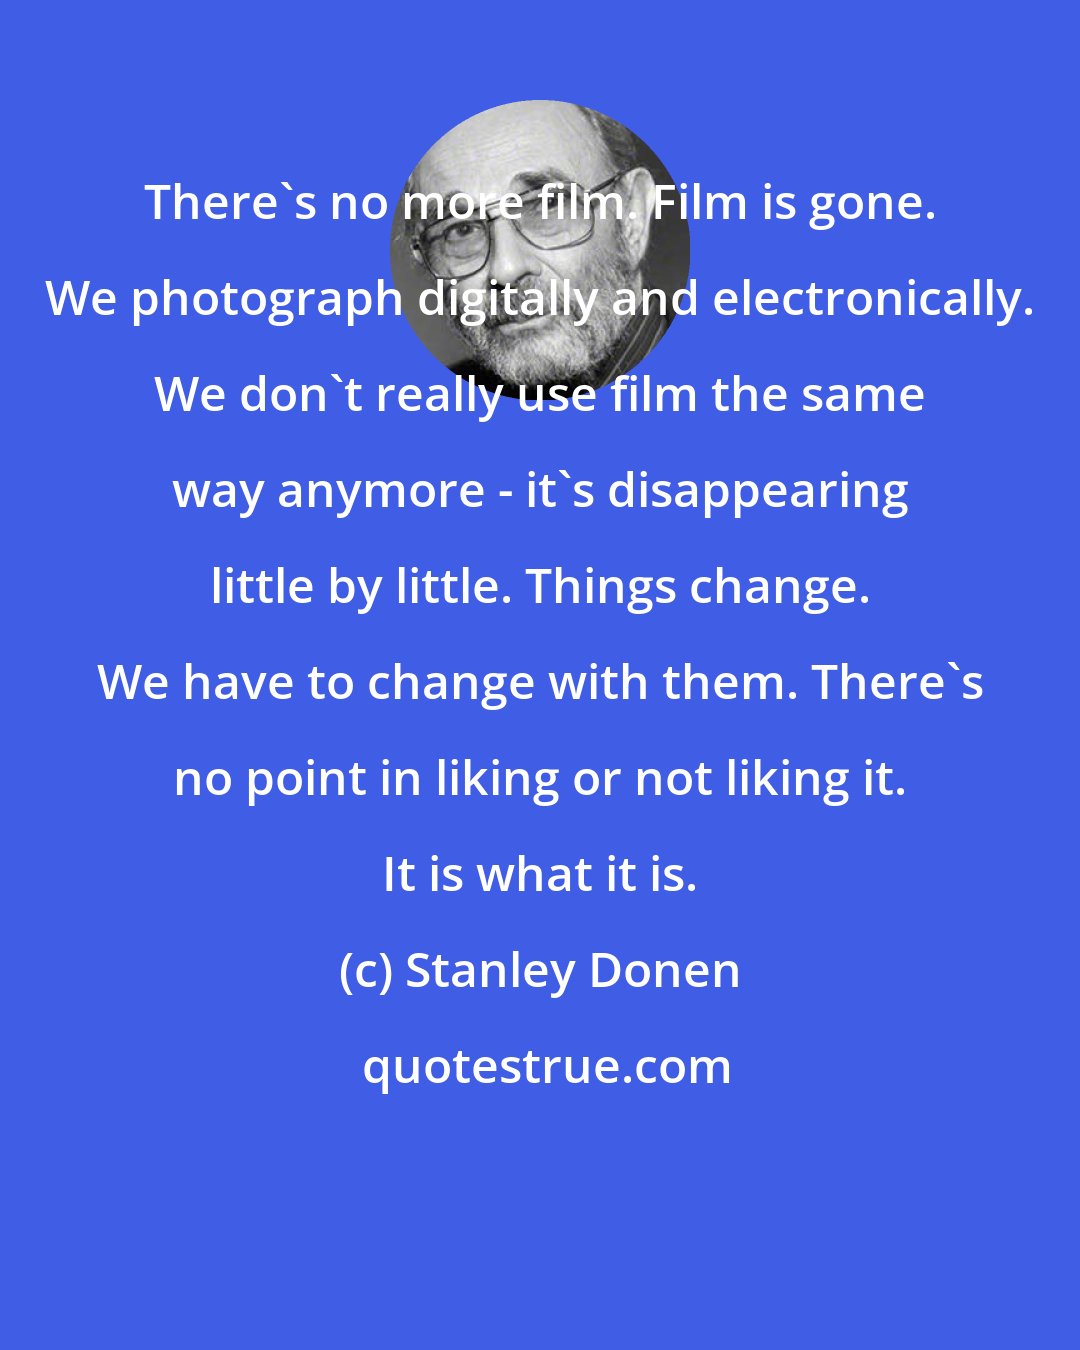 Stanley Donen: There's no more film. Film is gone. We photograph digitally and electronically. We don't really use film the same way anymore - it's disappearing little by little. Things change. We have to change with them. There's no point in liking or not liking it. It is what it is.